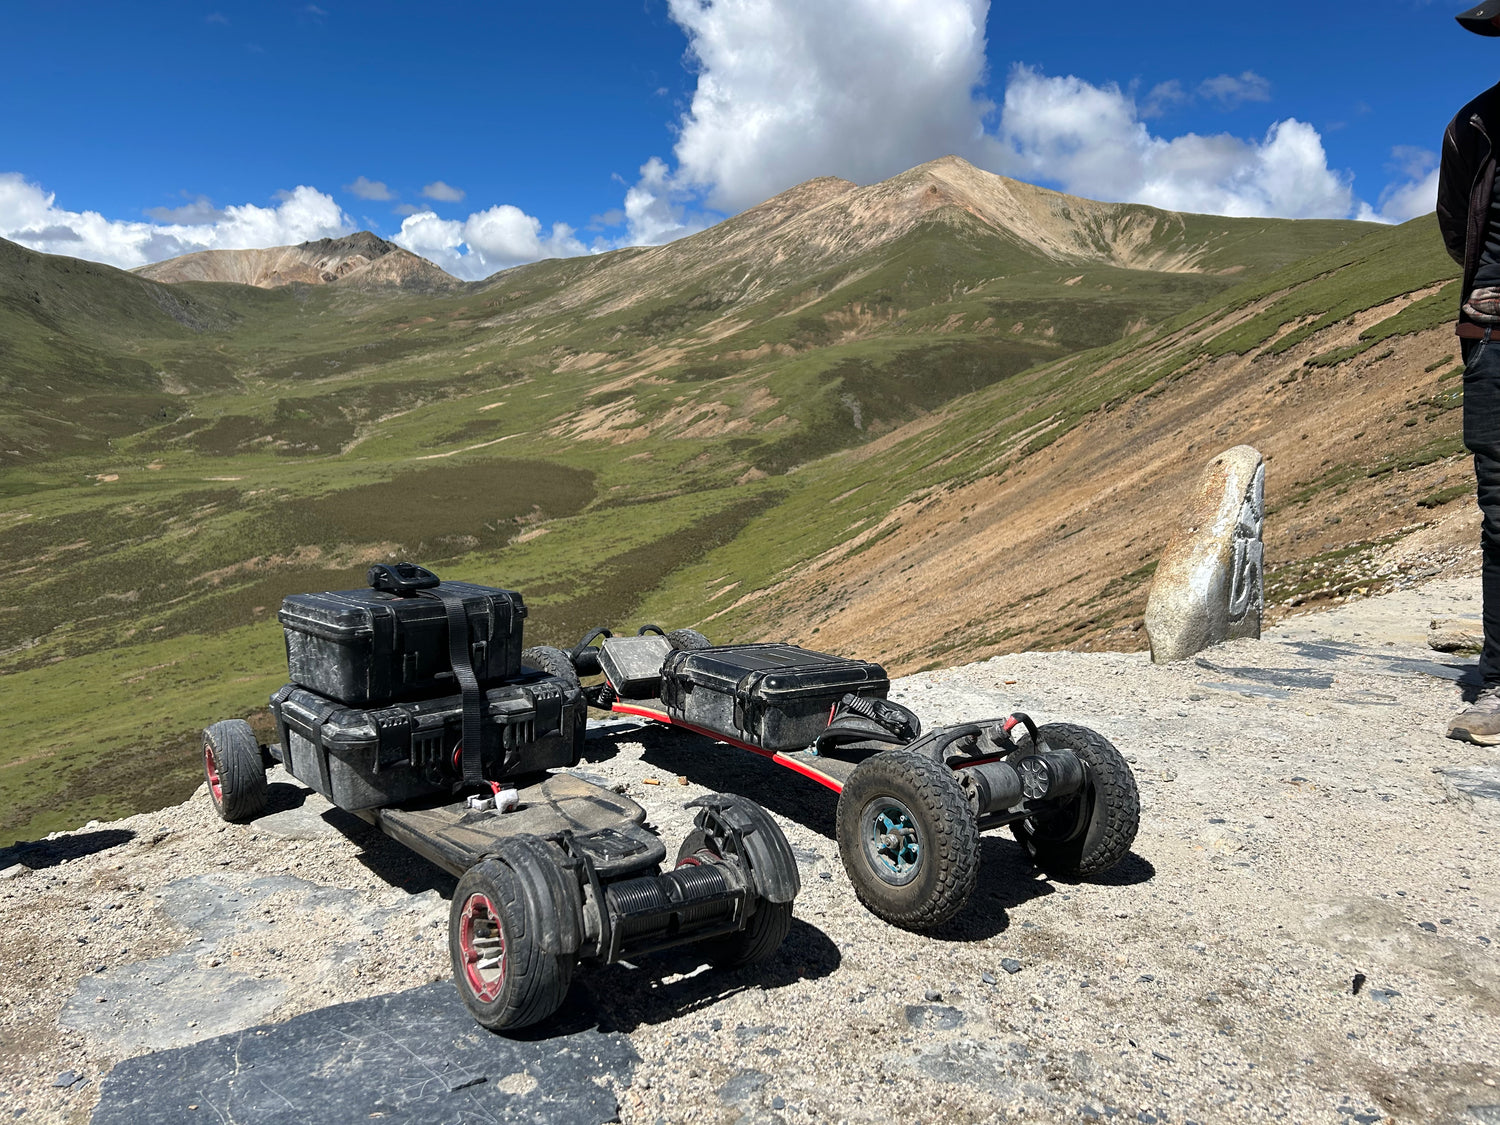 2146.8 Kilometers! – The Hurricane's Challenge on Highway 318 from Sichuan to Tibet